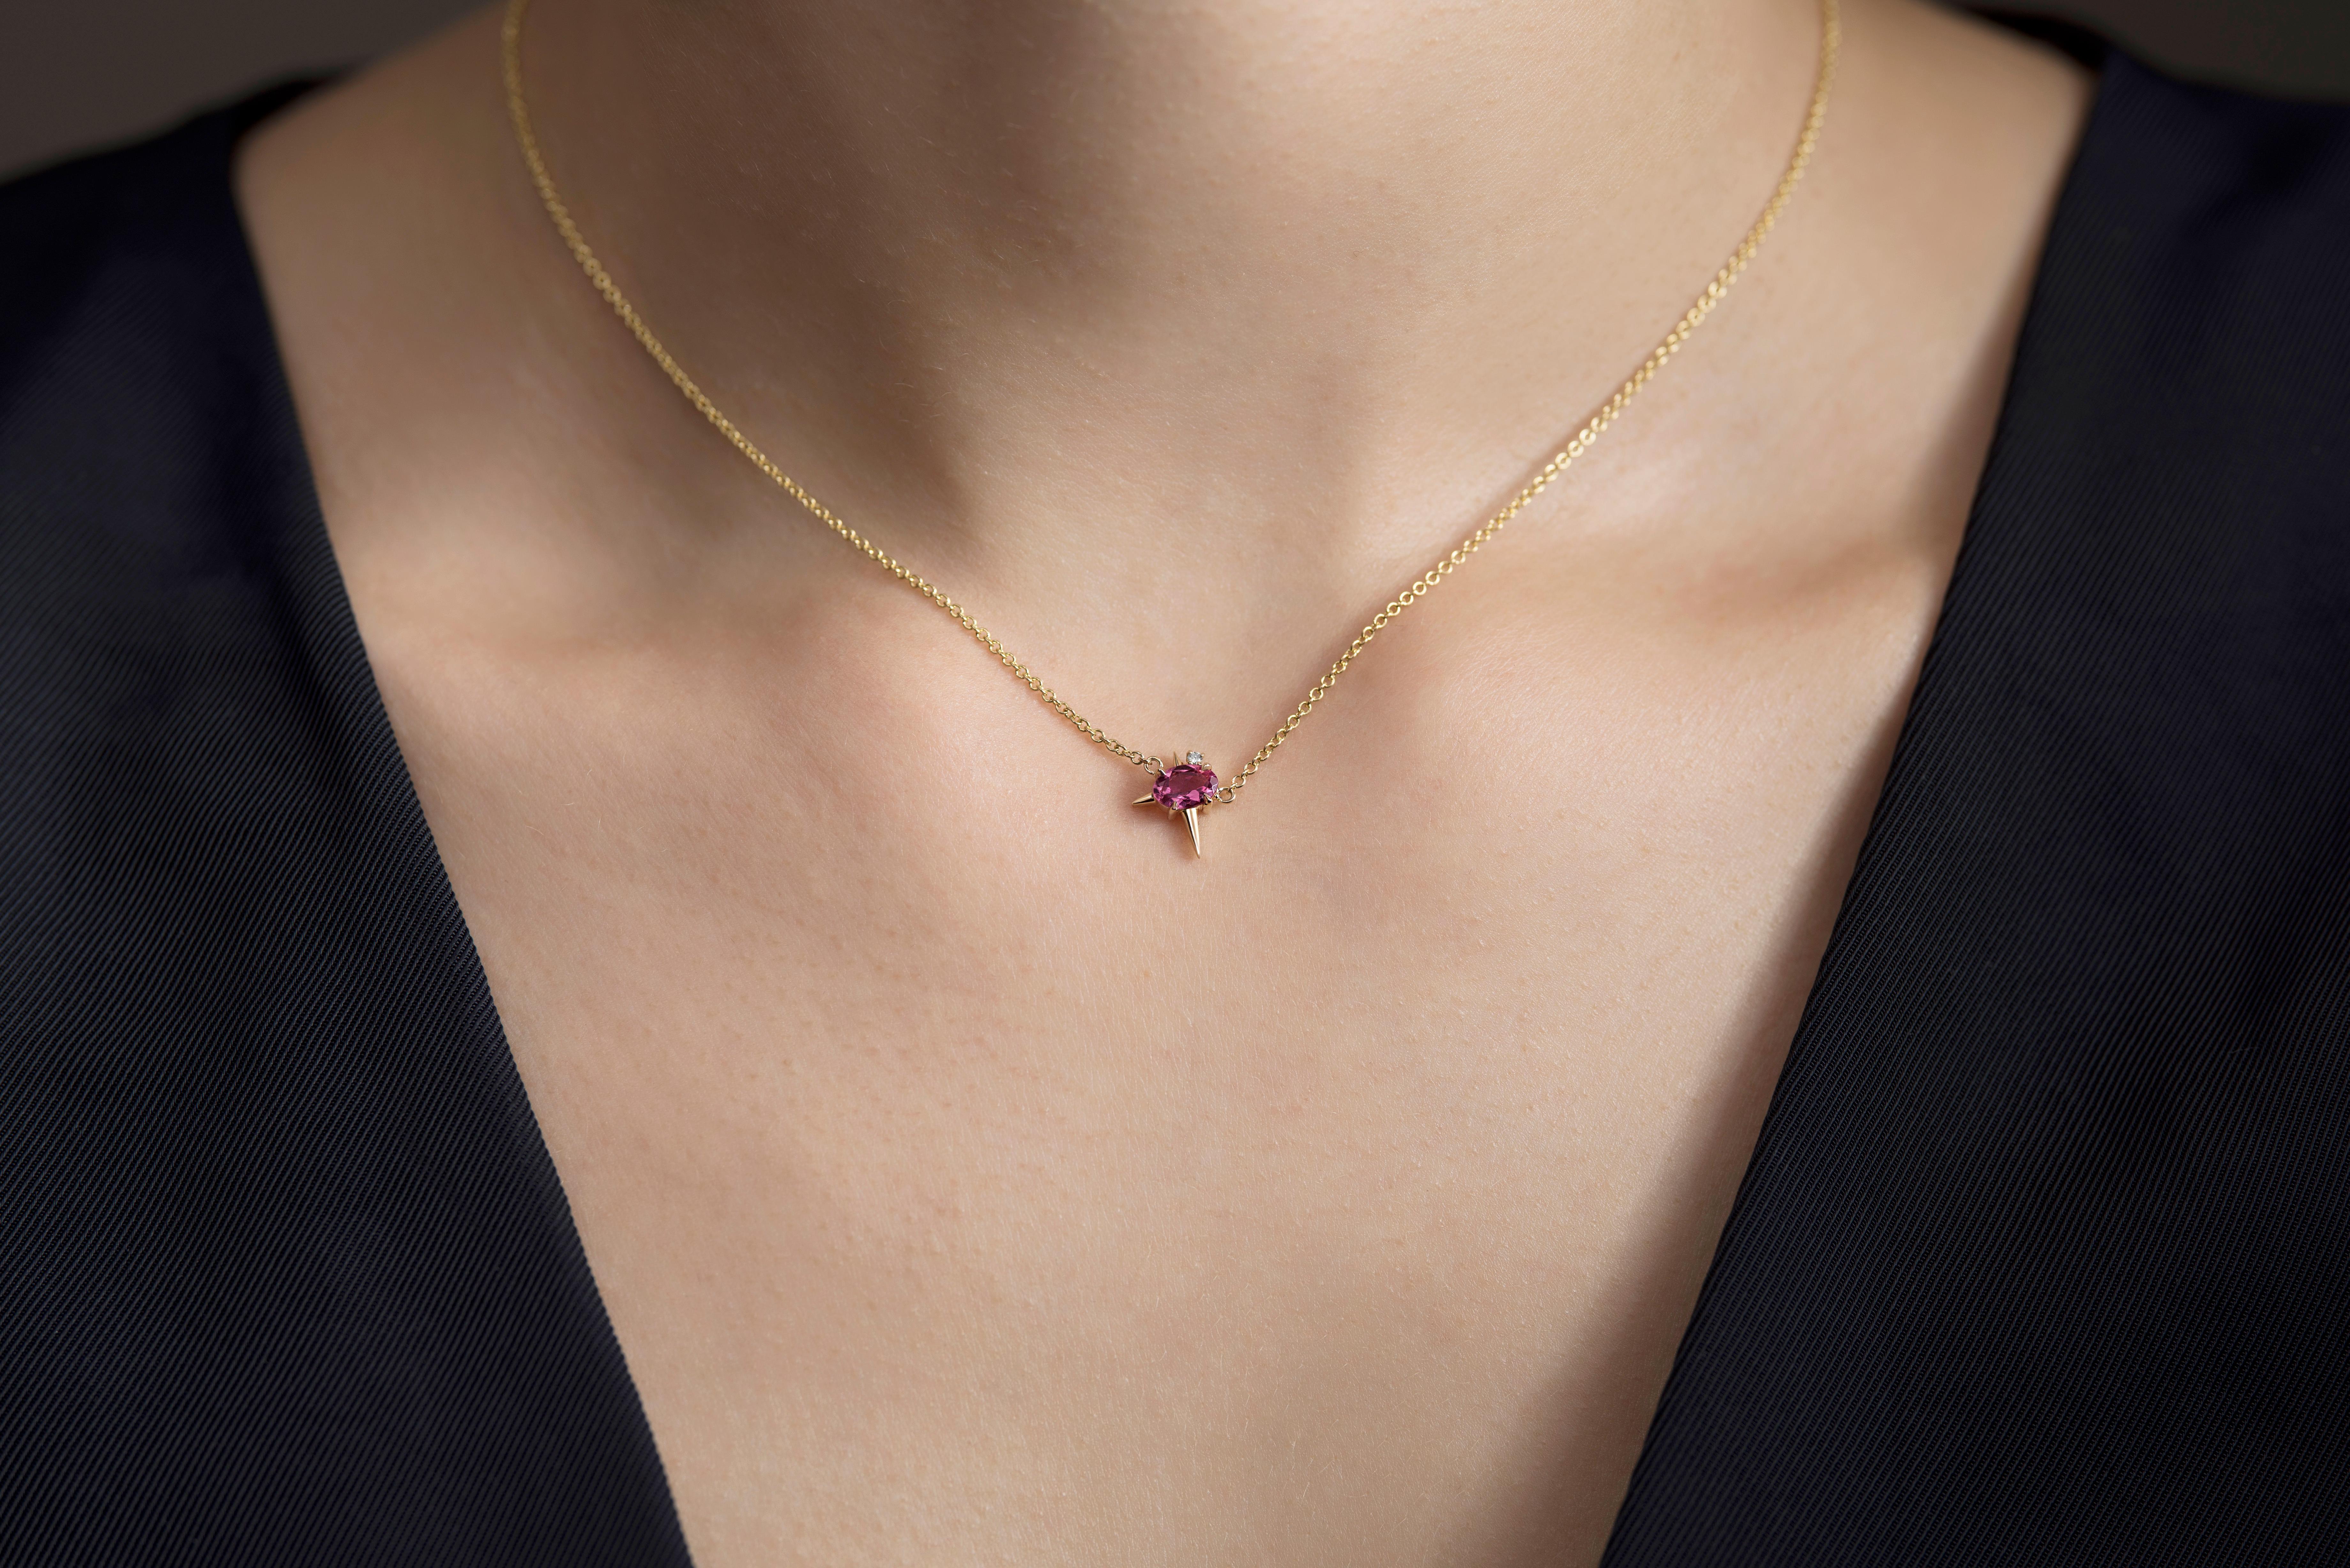 - Adjustable Cable Chain - Longest at 18inches (45cm)
- Approx 9mm long x 8mm wide
- Oval Shape Pink Tourmaline 6mm x 4mm 
- Pink Tourmaline Total Carat Weight 0.50ct Approx
- 1 x Round Brilliant Cut Diamond F-VS 0.01ct
- Total Gold Weight Approx